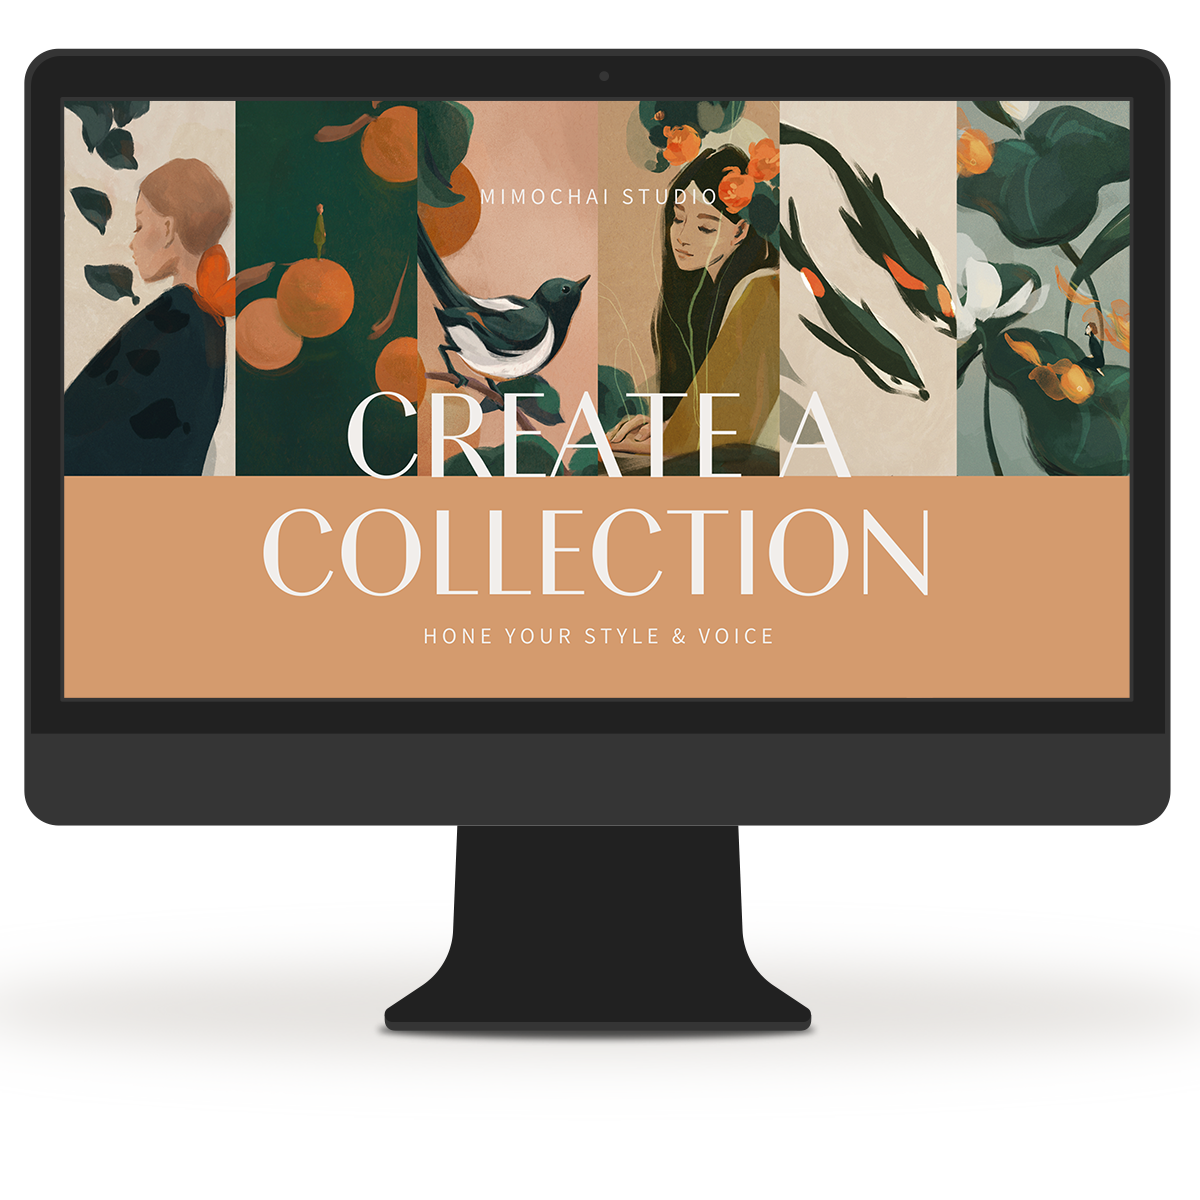 Create a Collection | Class